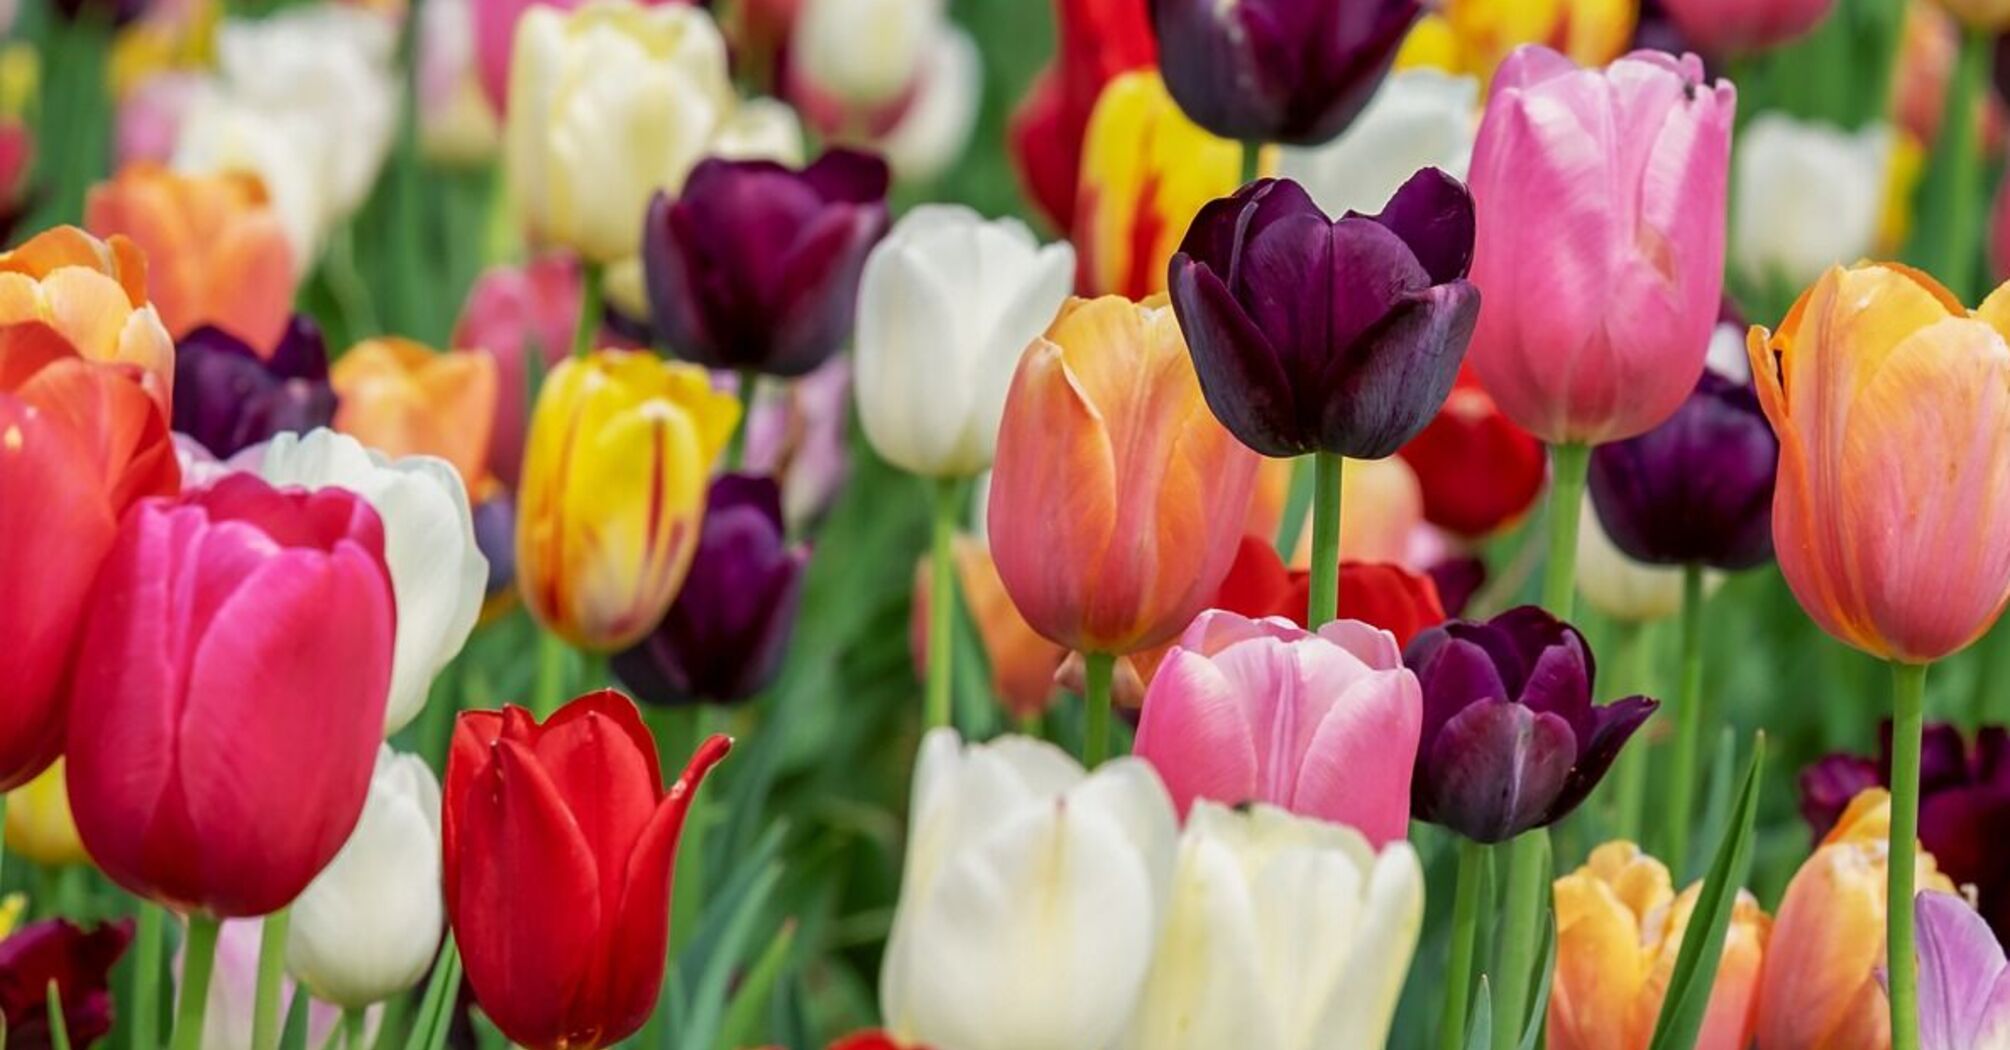 How to make tulips bloom lushly: an effective fertilizer will help